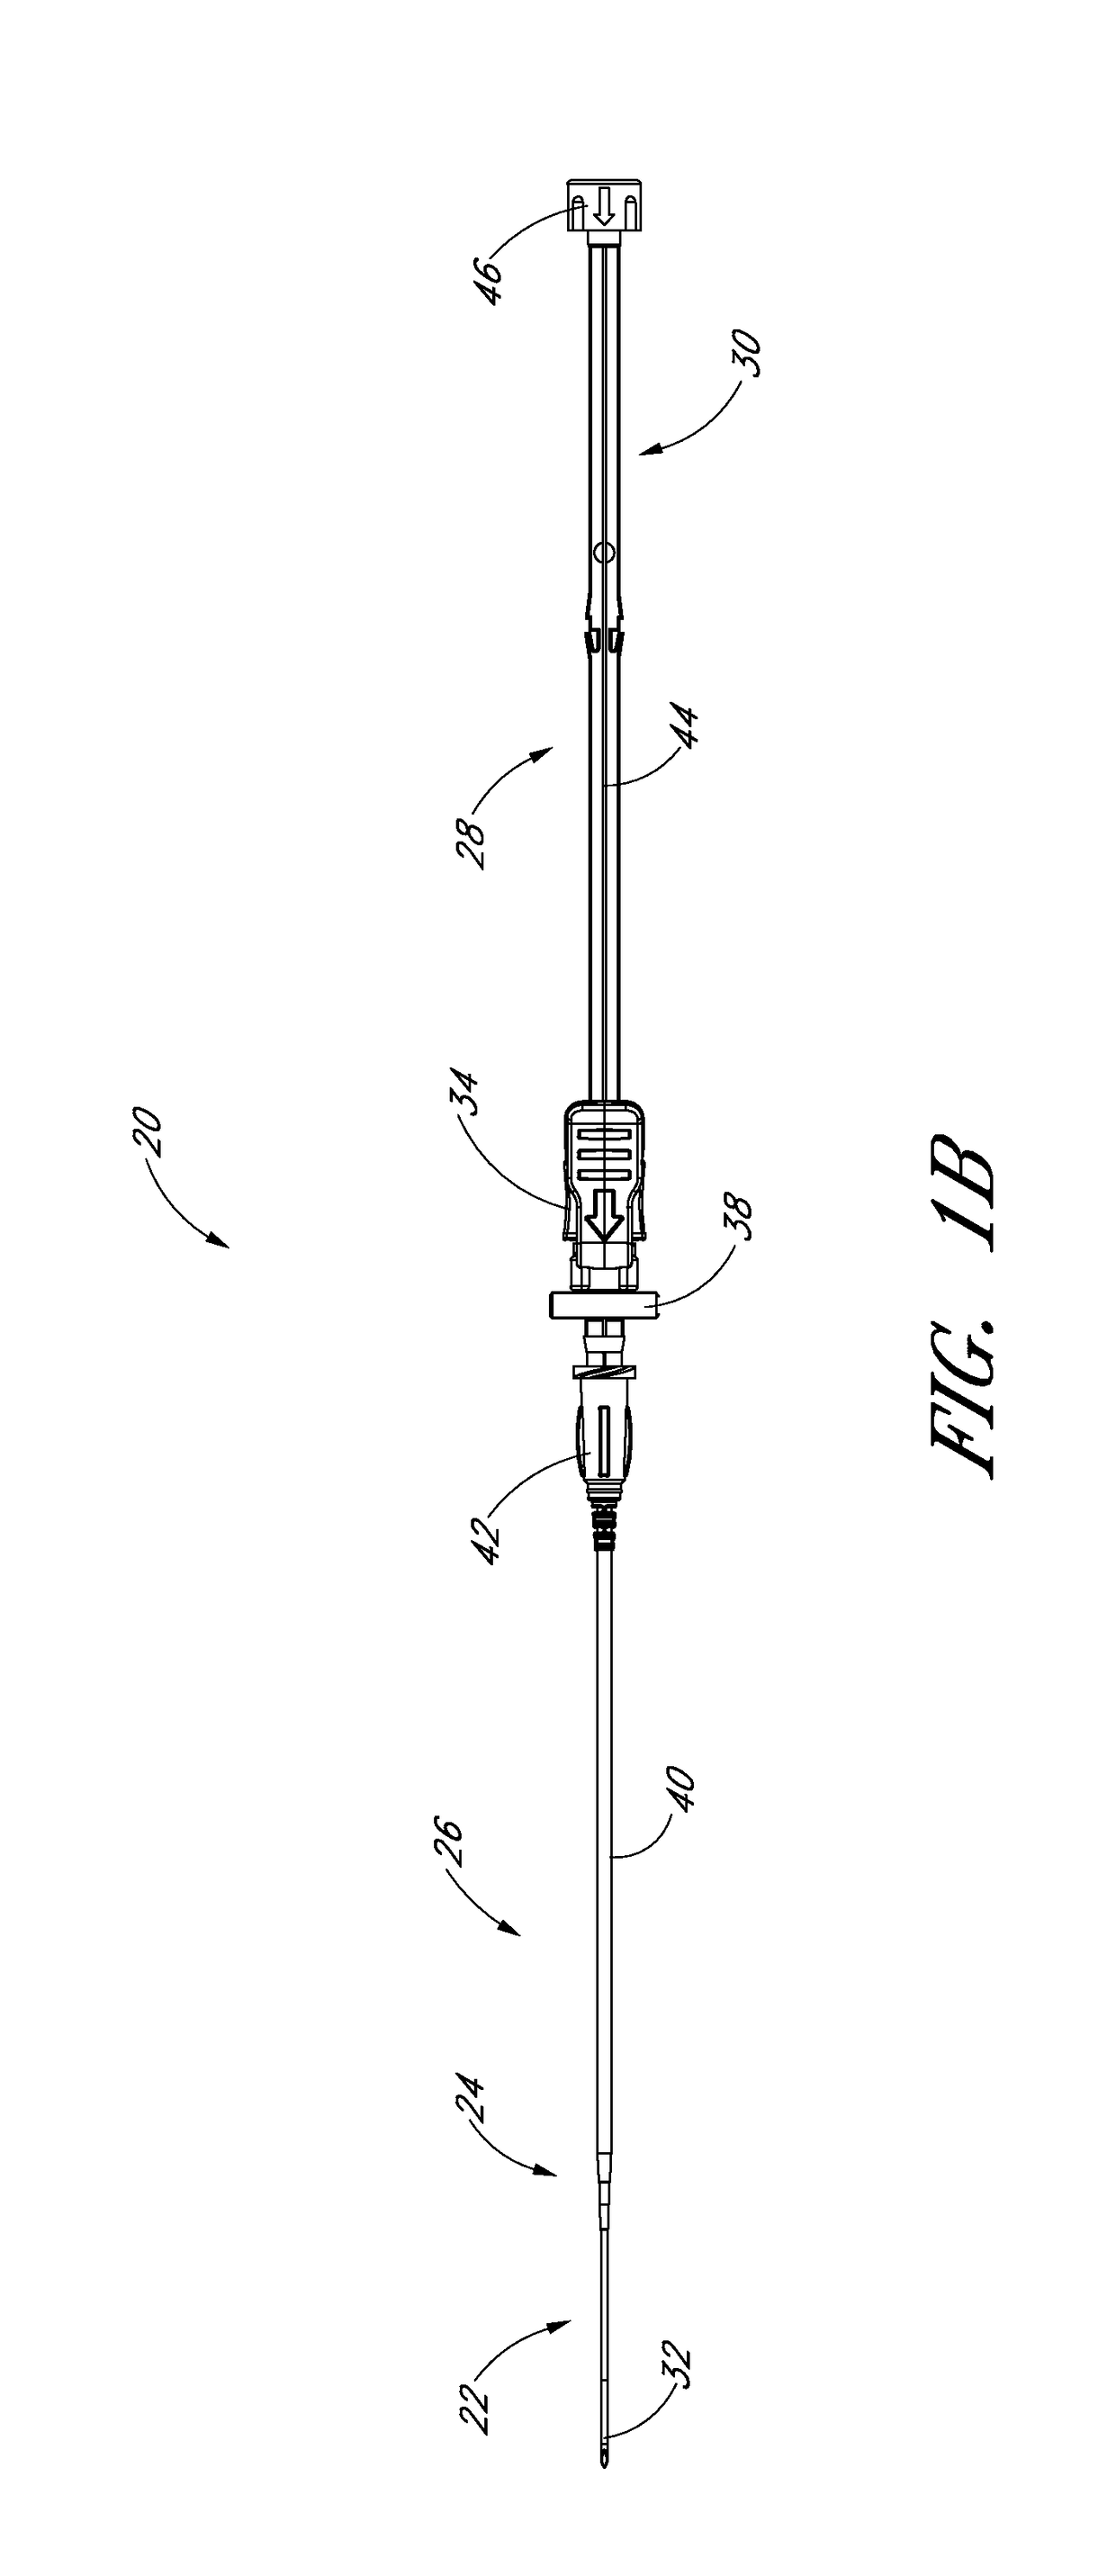 Flexible medical article and method of making the same